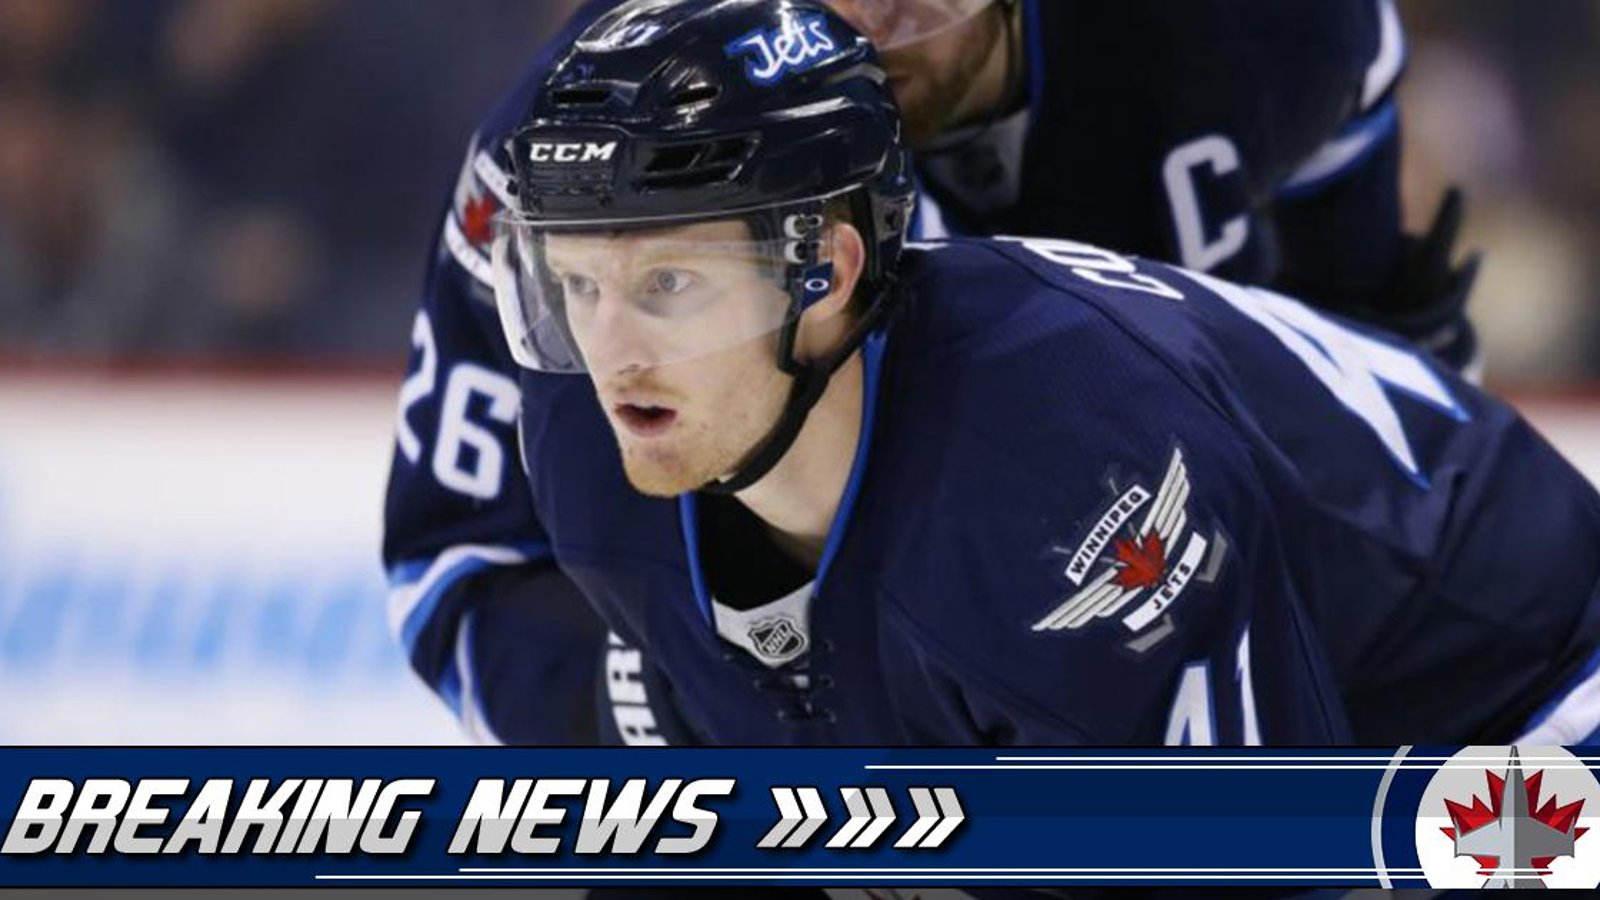 Breaking: Bad news for Jets former first round pick!